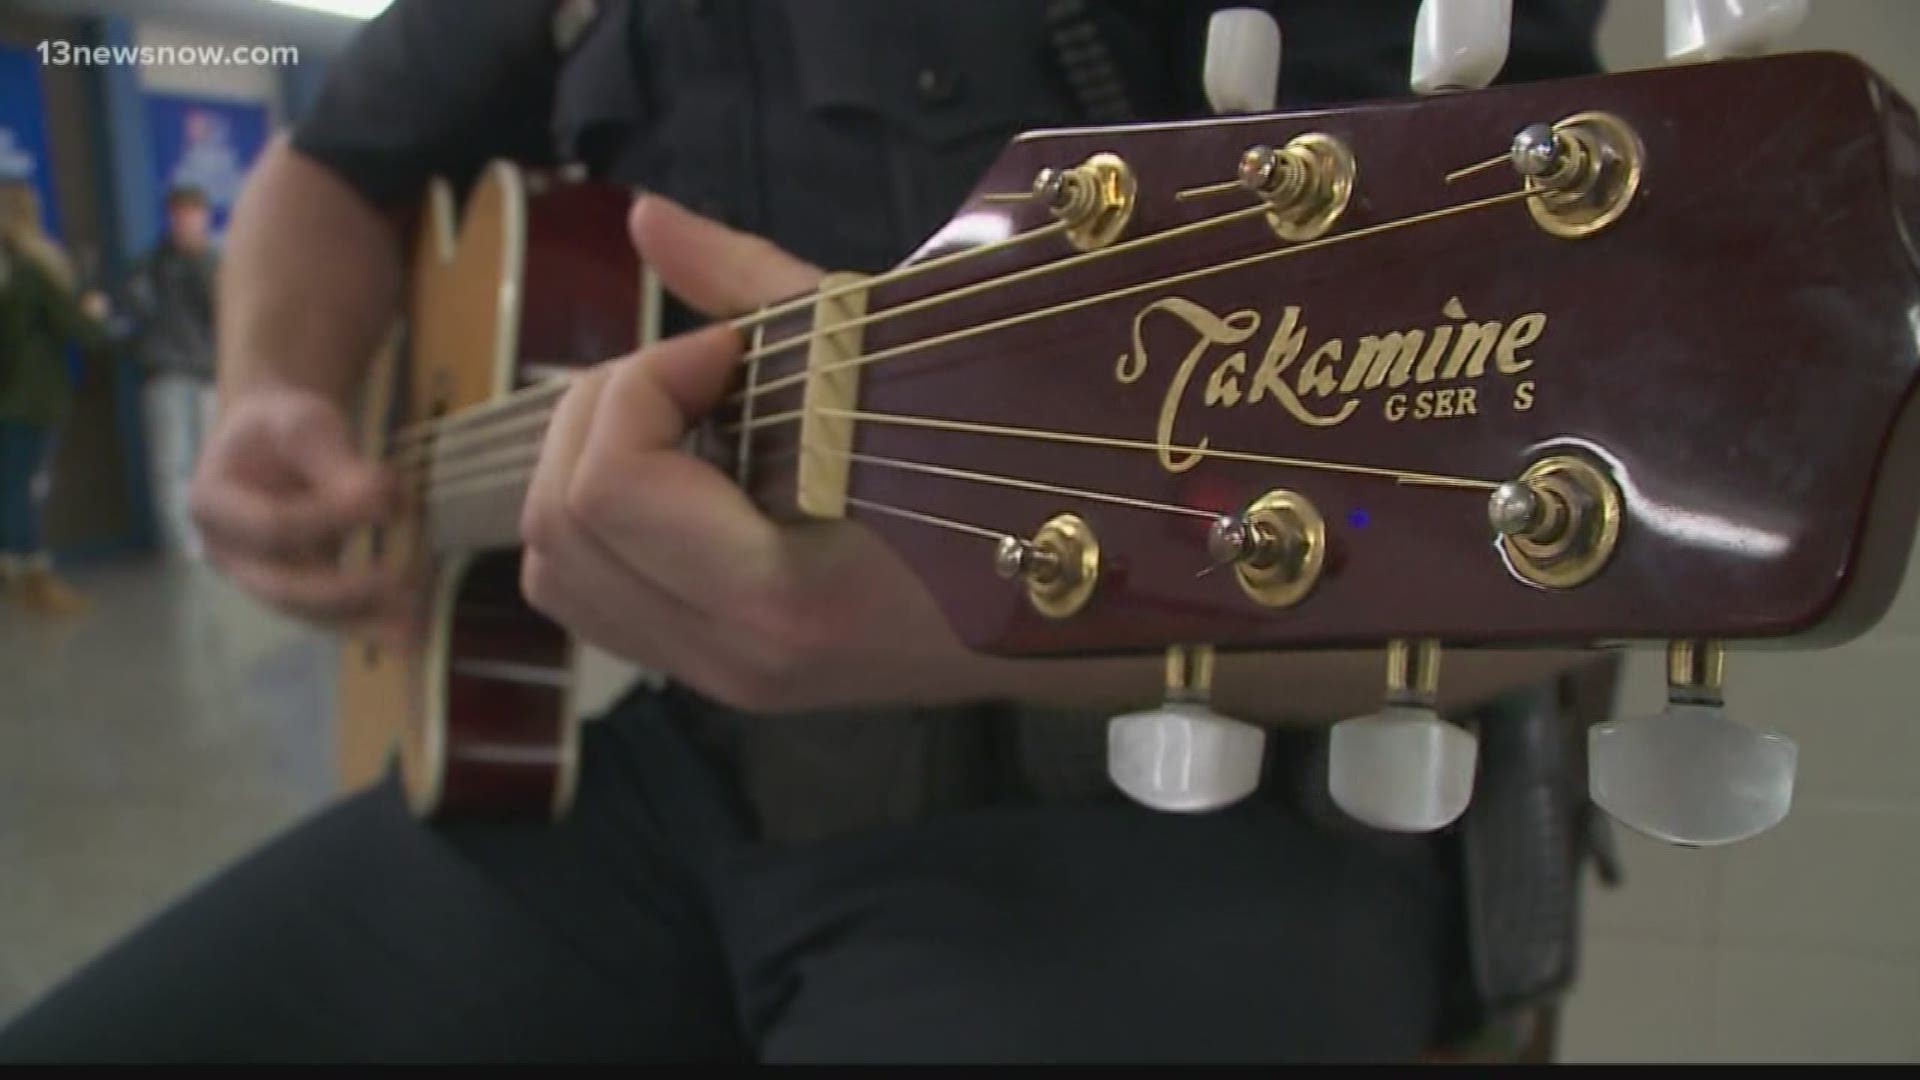 Guitar-playing SRO's hobby becomes his trademark as he keeps students safe and in check.